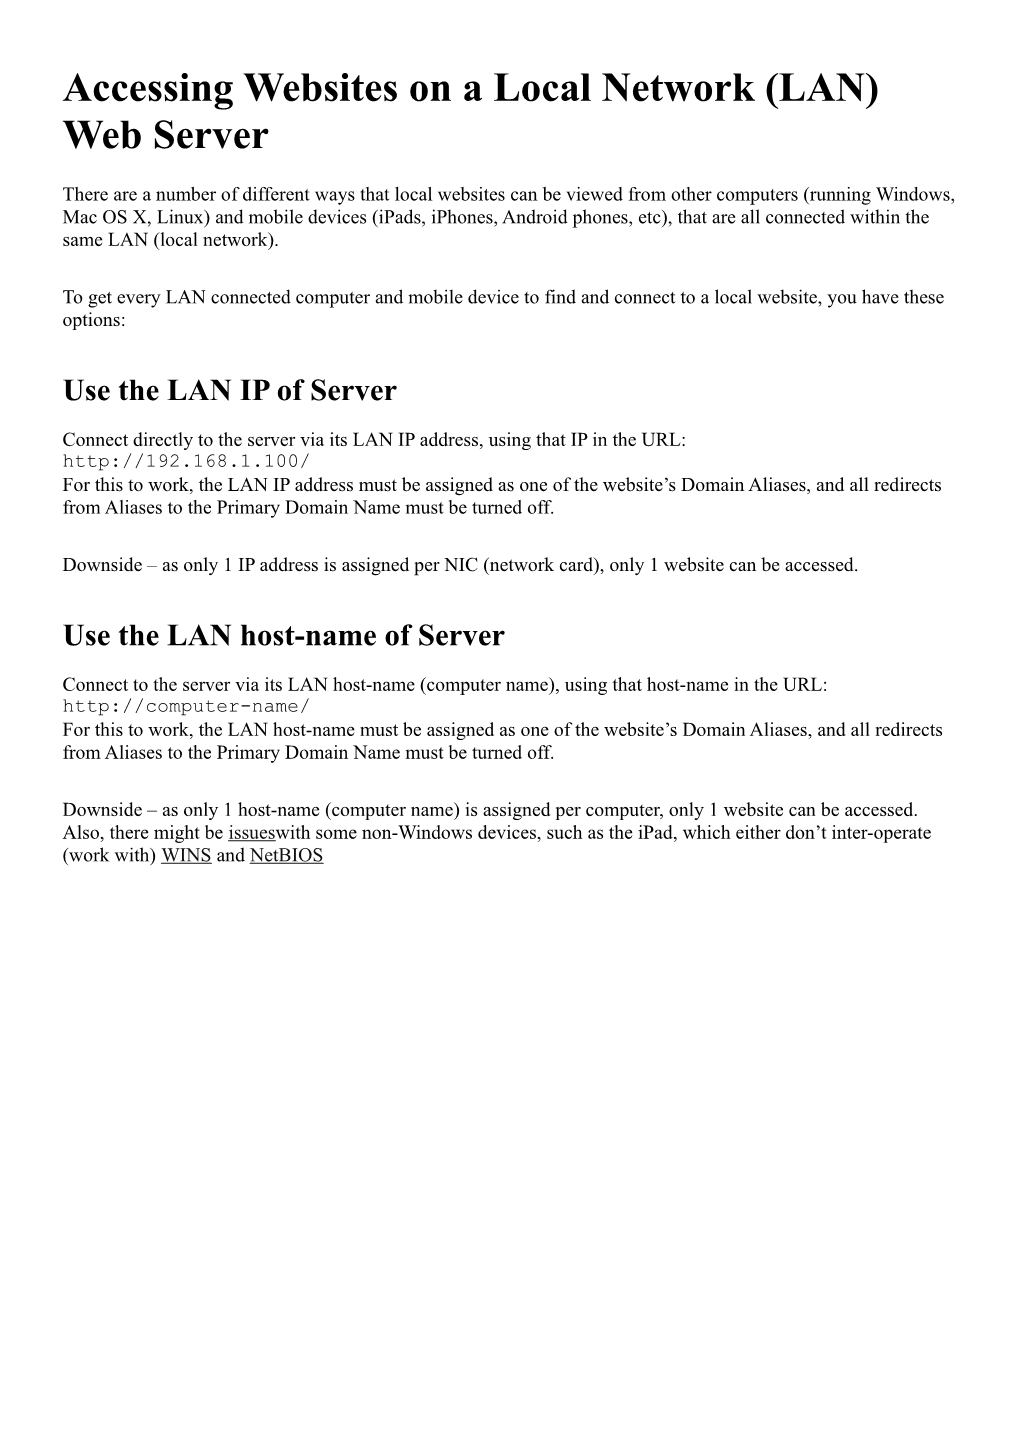 Accessing Websites on a Local Network (LAN) Web Server